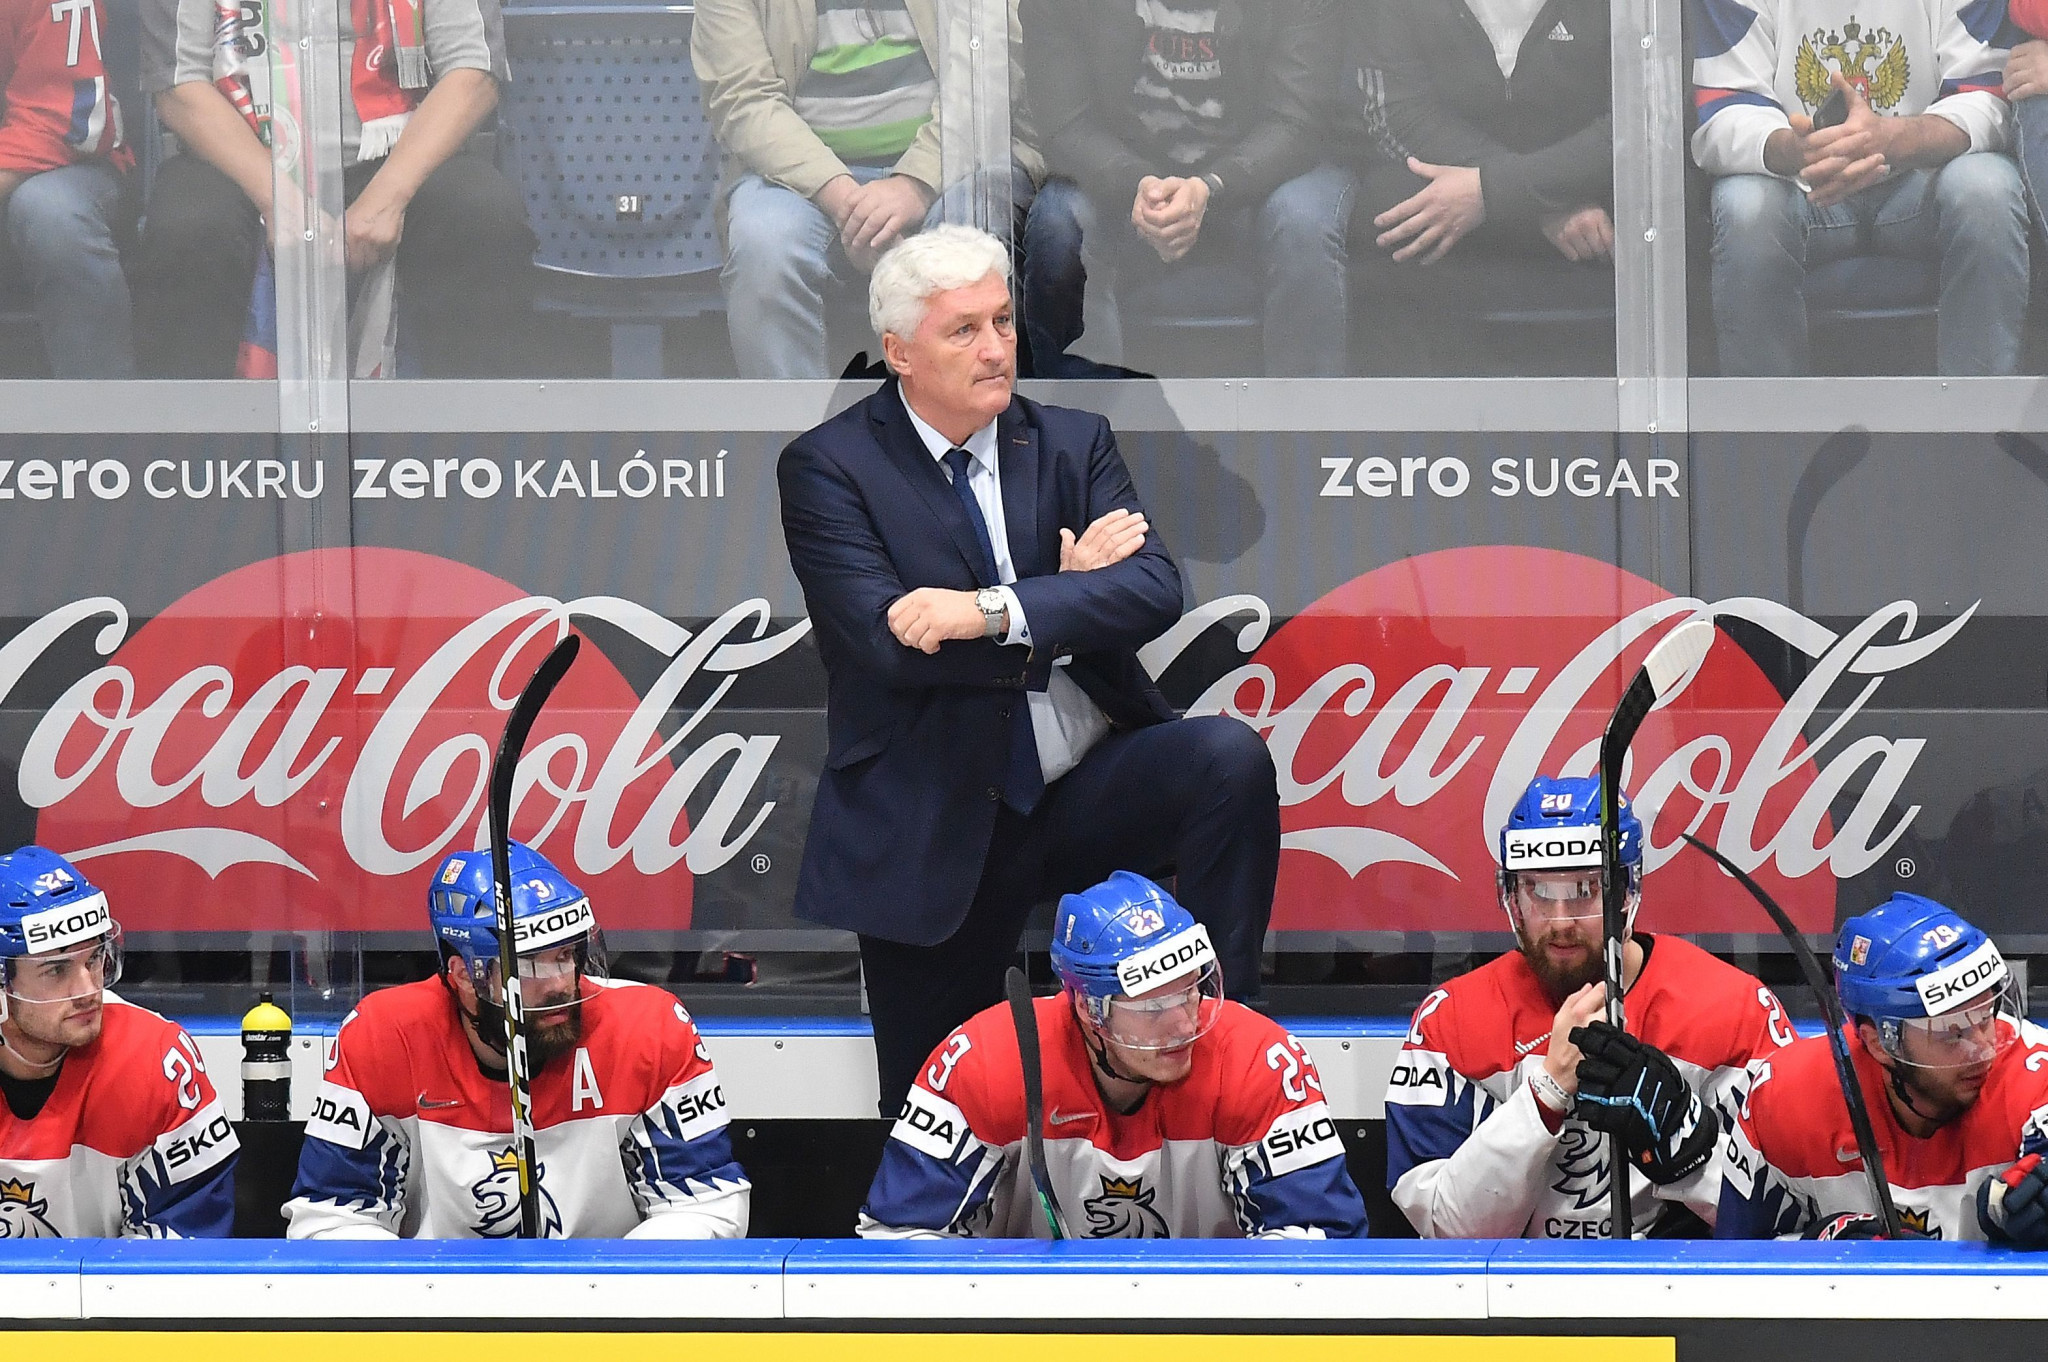 Milos Riha guided Czech Republic to fourth place at the 2019 International Ice Hockey Federation World Championship in Slovakia ©Getty Images